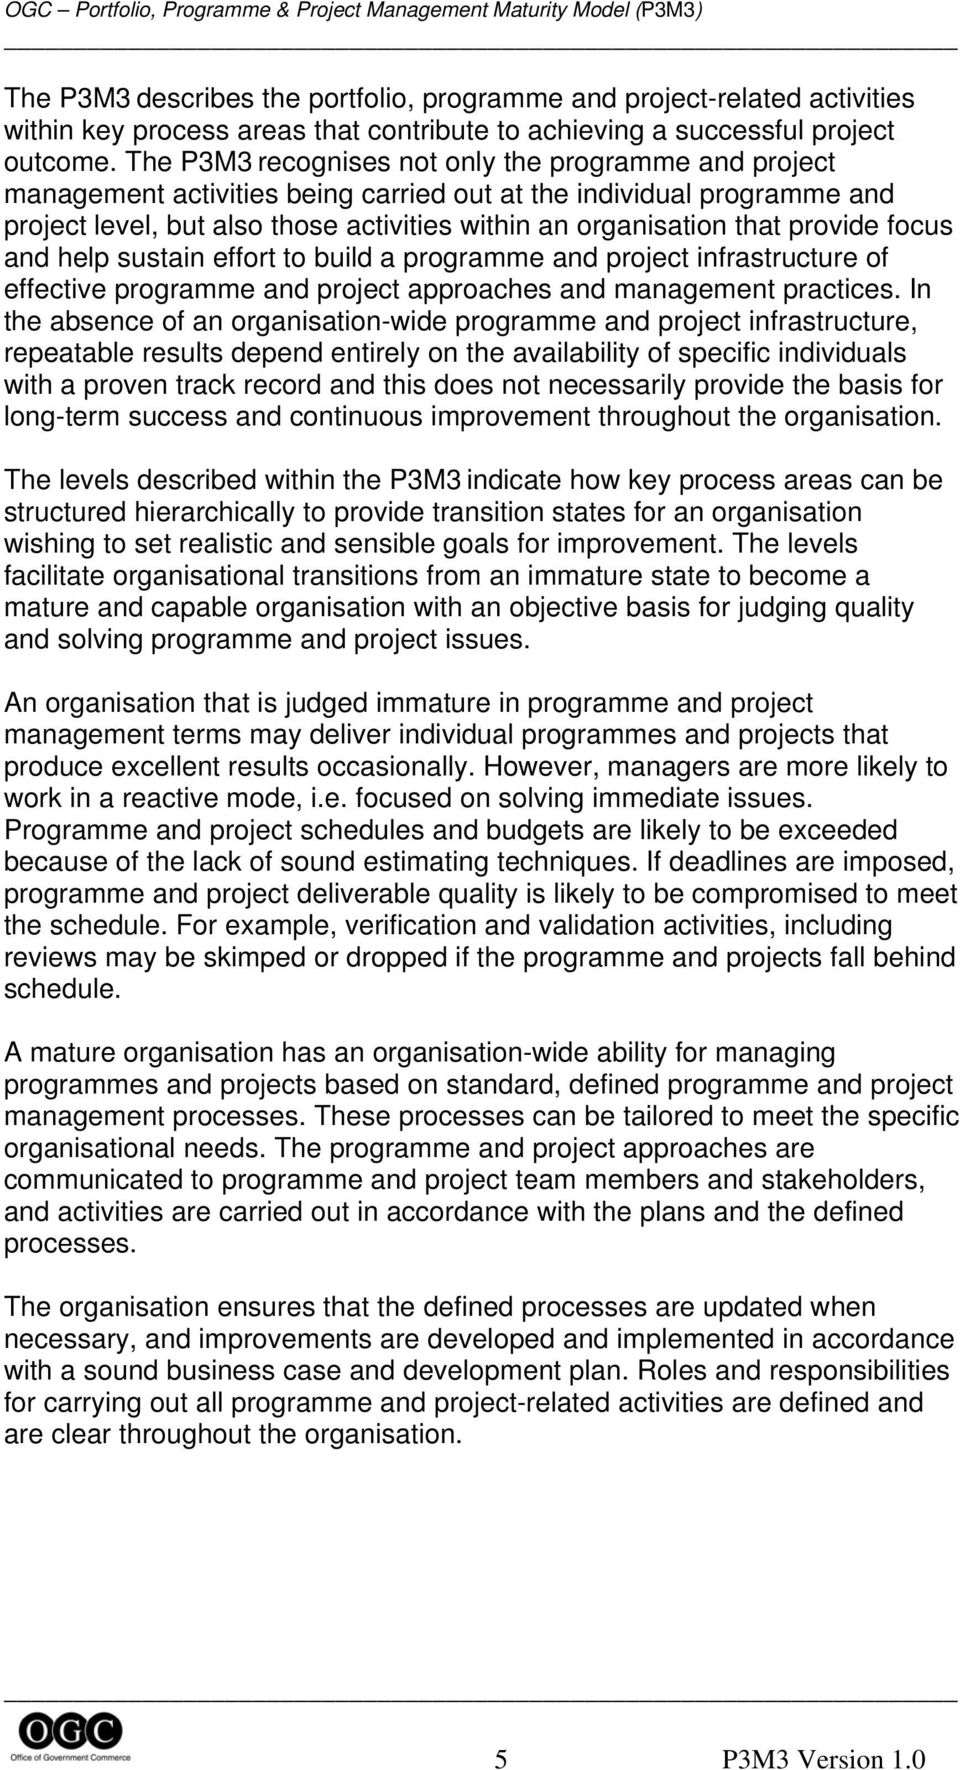 provide focus and help sustain effort to build a programme and project infrastructure of effective programme and project approaches and management practices.